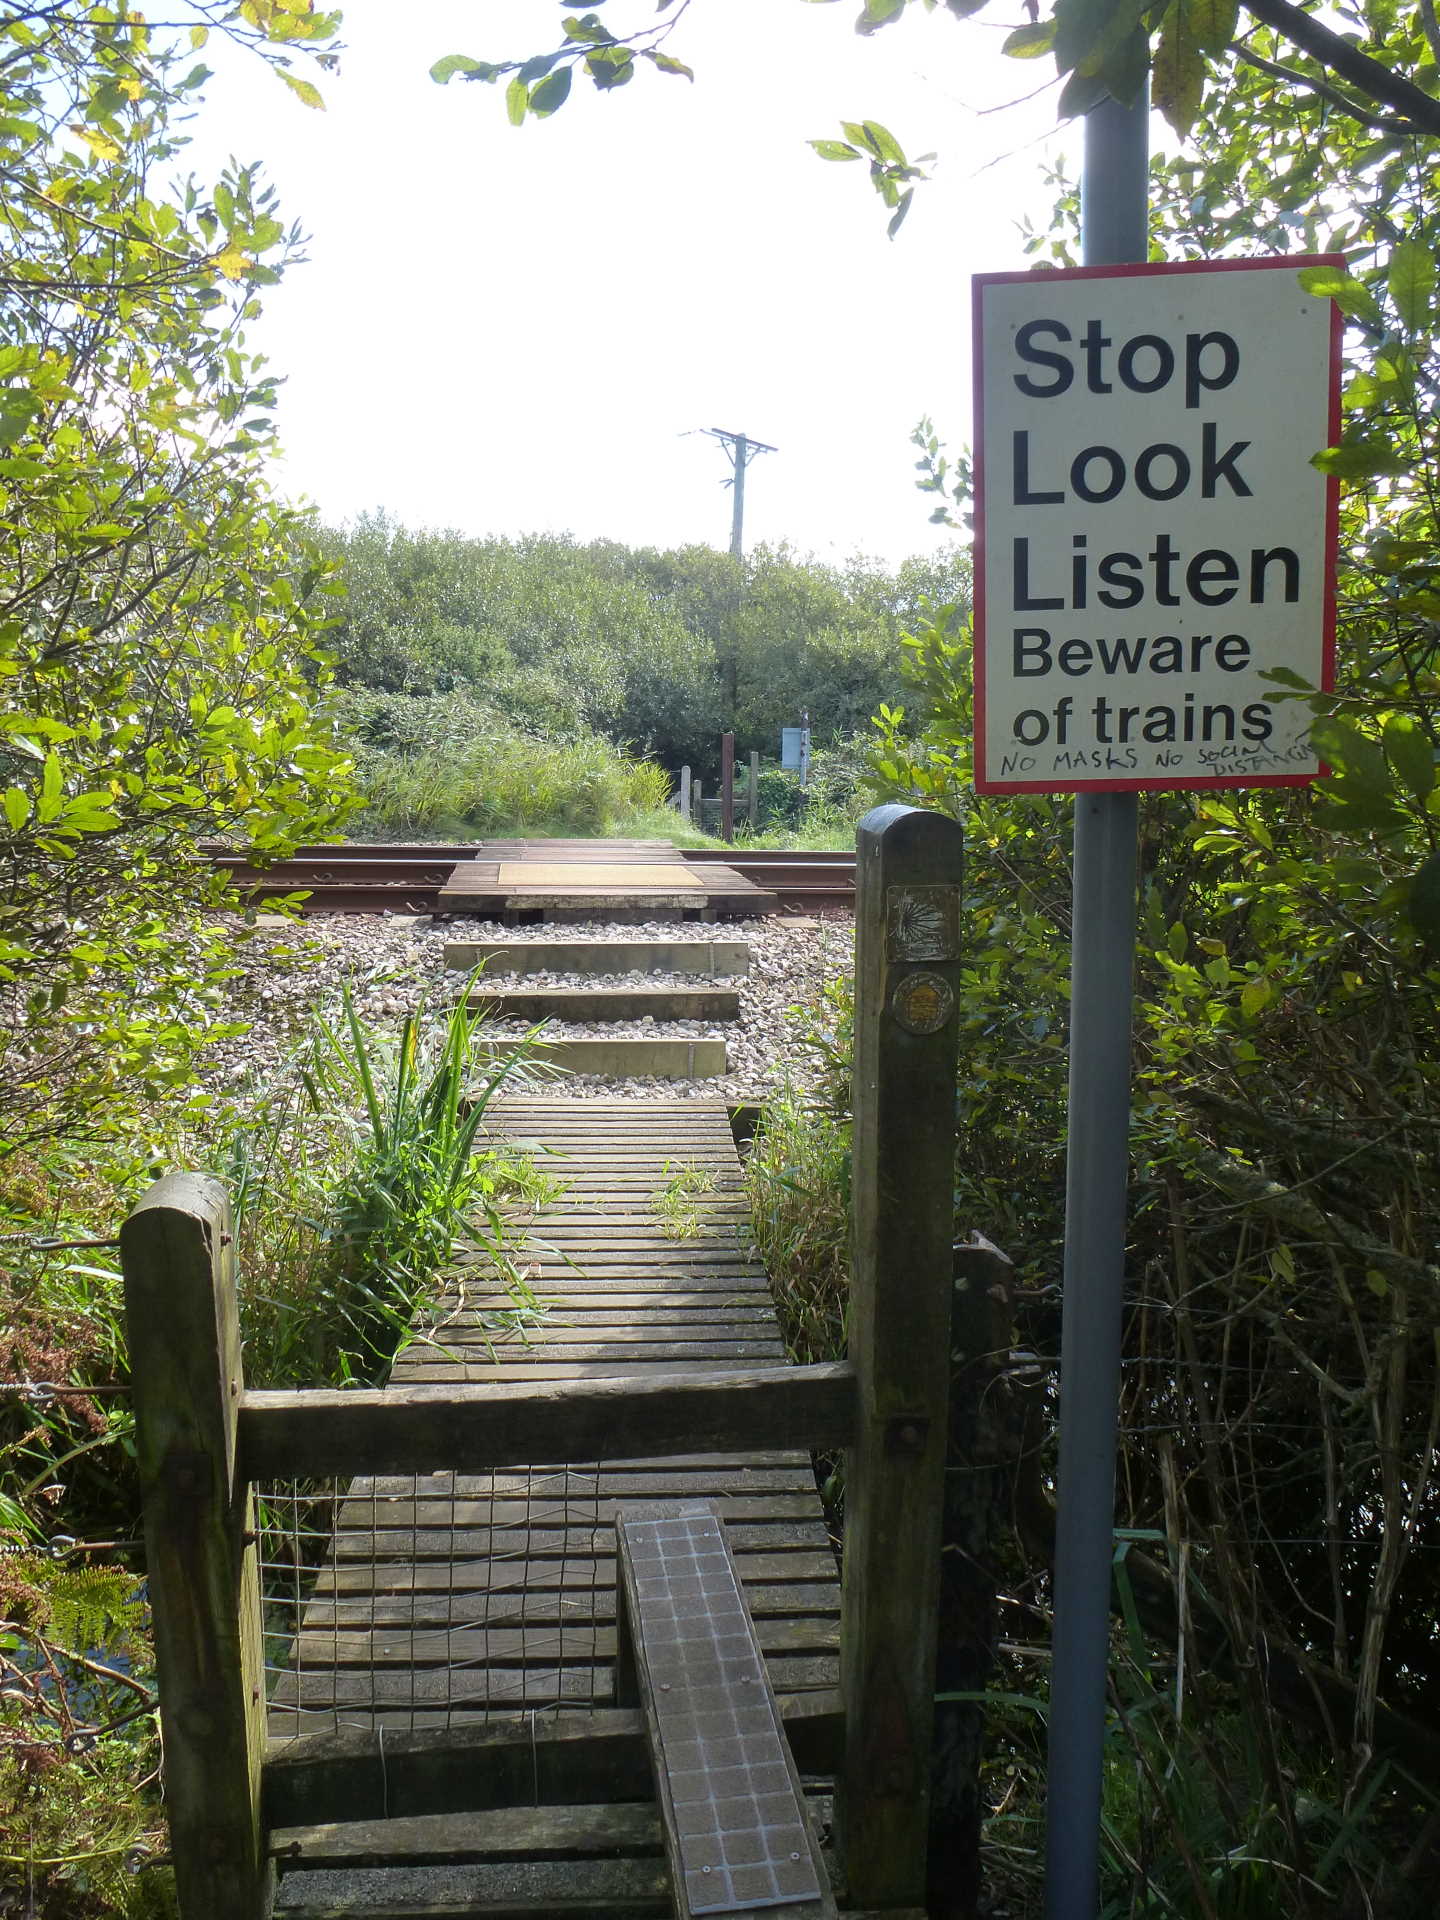 A pedestrian railway crossing emerging from the woods